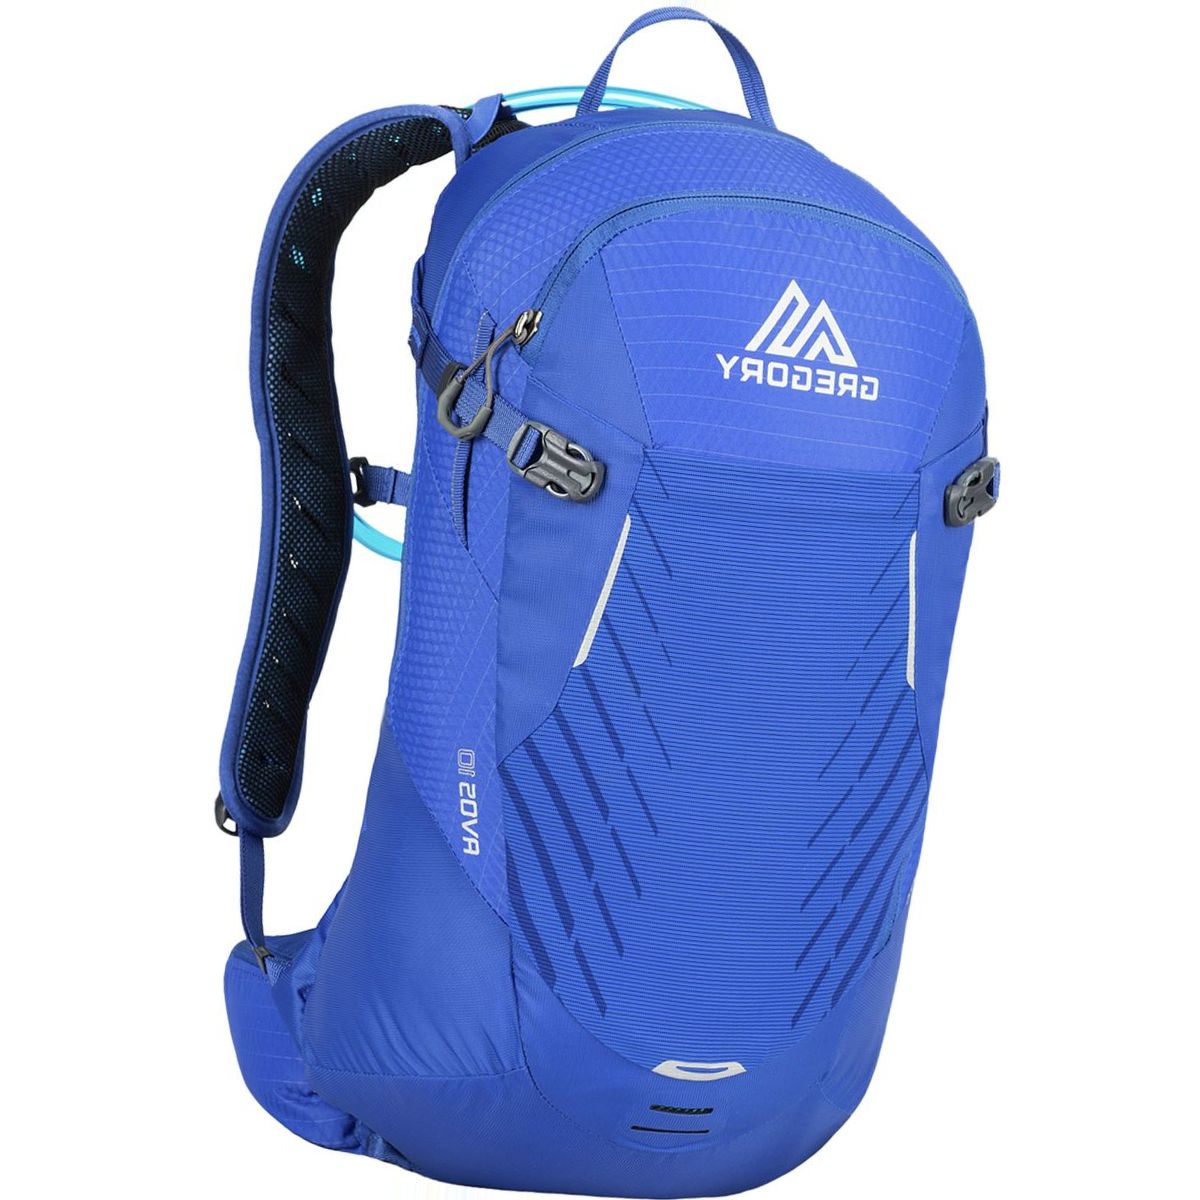 Gregory Avos 10L Hydration Backpack - Women's